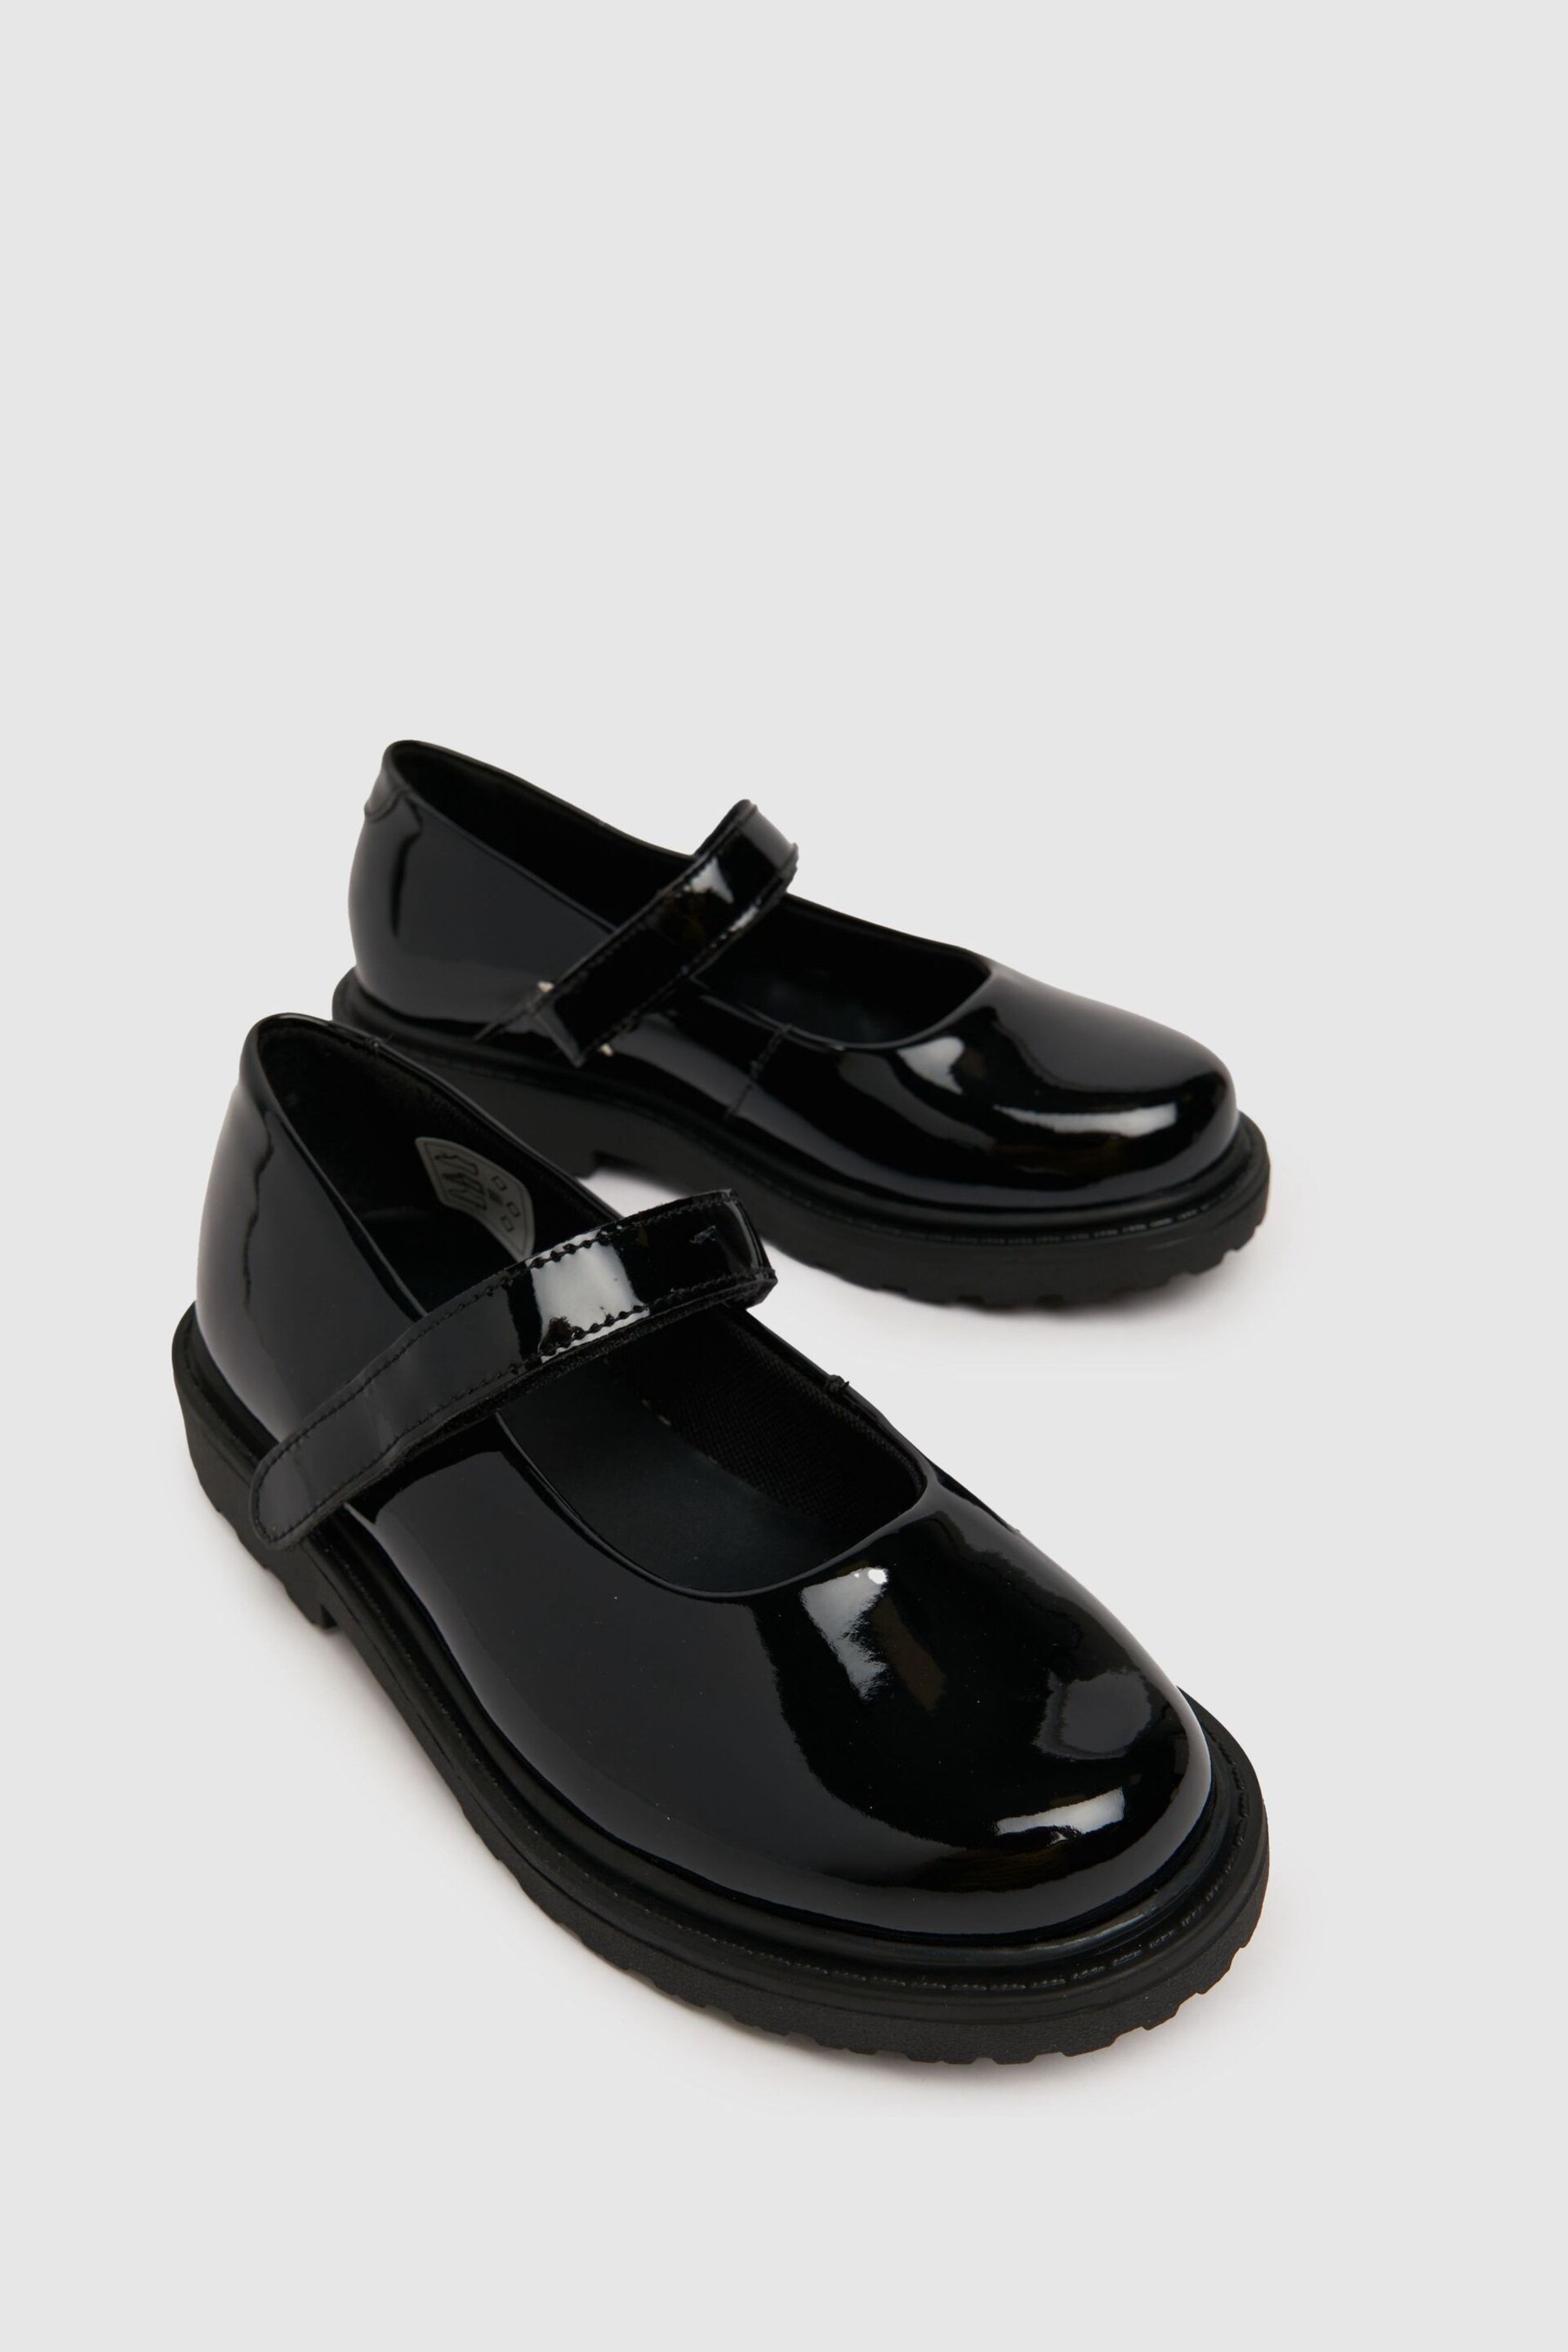 Schuh Junior Black Lagoon Mary Jane Shoes - Image 4 of 5